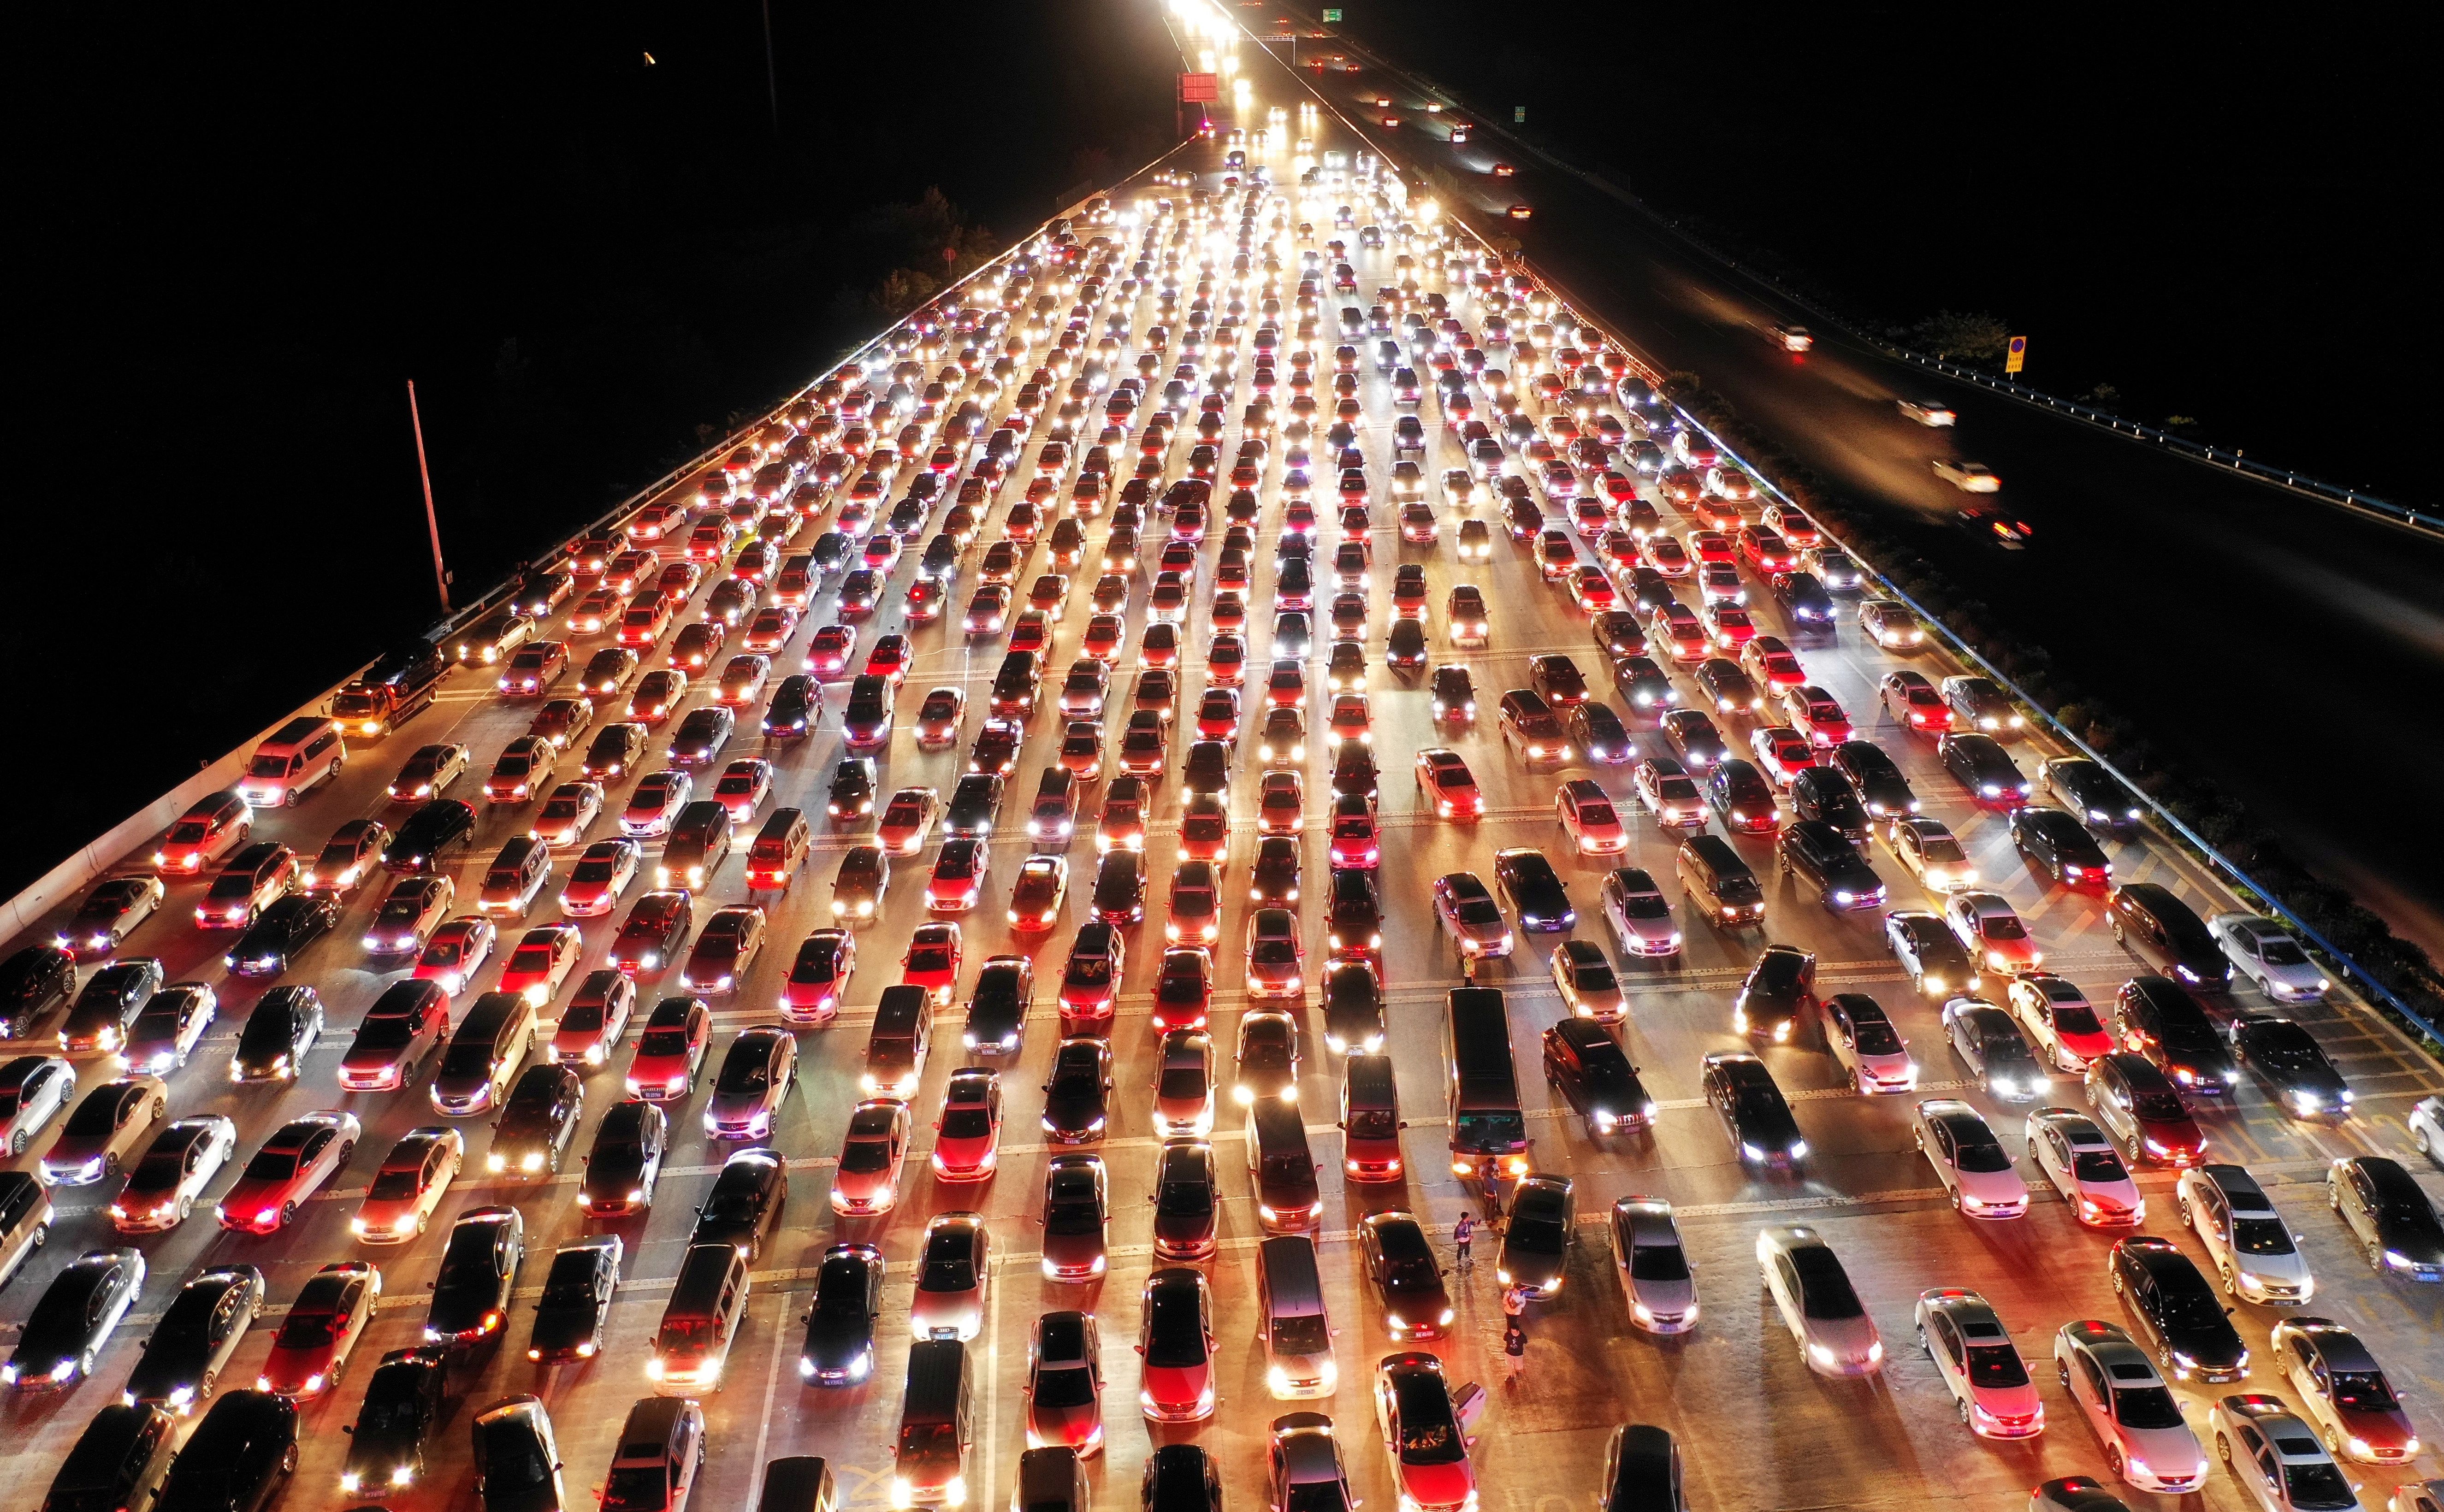 Vehicles are seen jammed on a express way near a toll station, at the end of the Mid-Autumn Festival holiday, in Zhengzhou, Henan